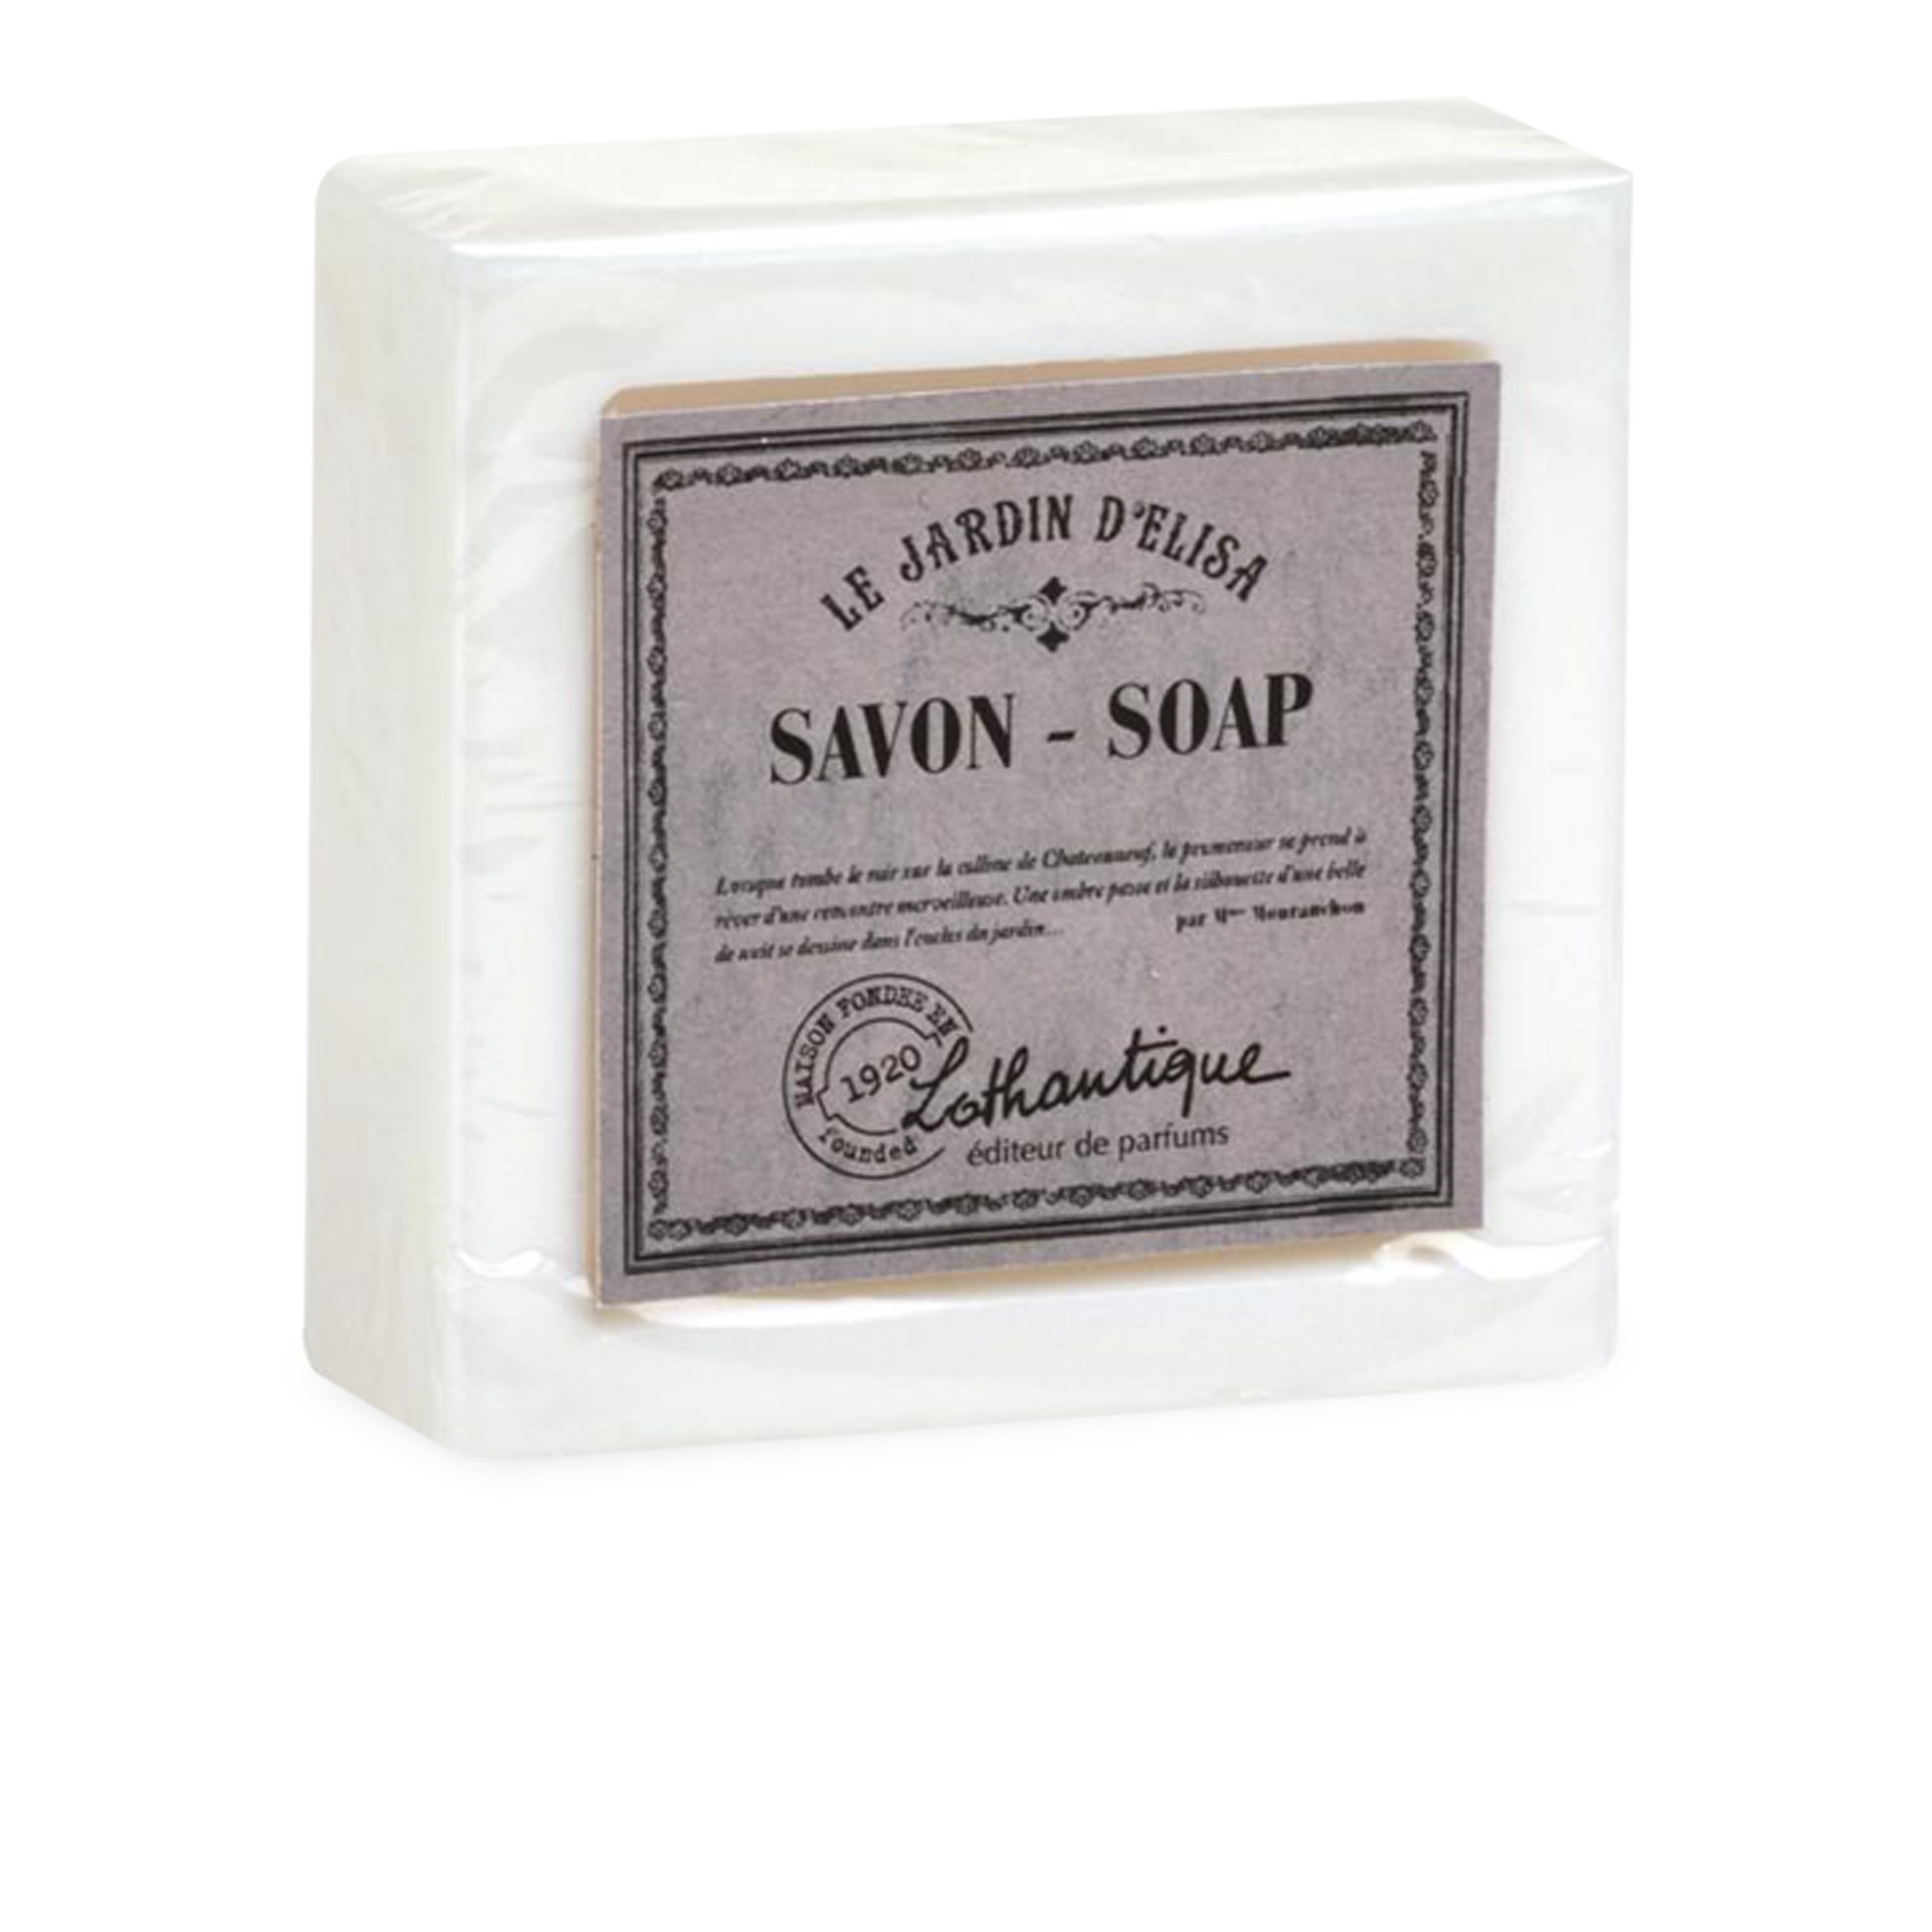 This triple-milled vegetable soap has a light, romantic scent, with notes of citron, jasmine and white musk.